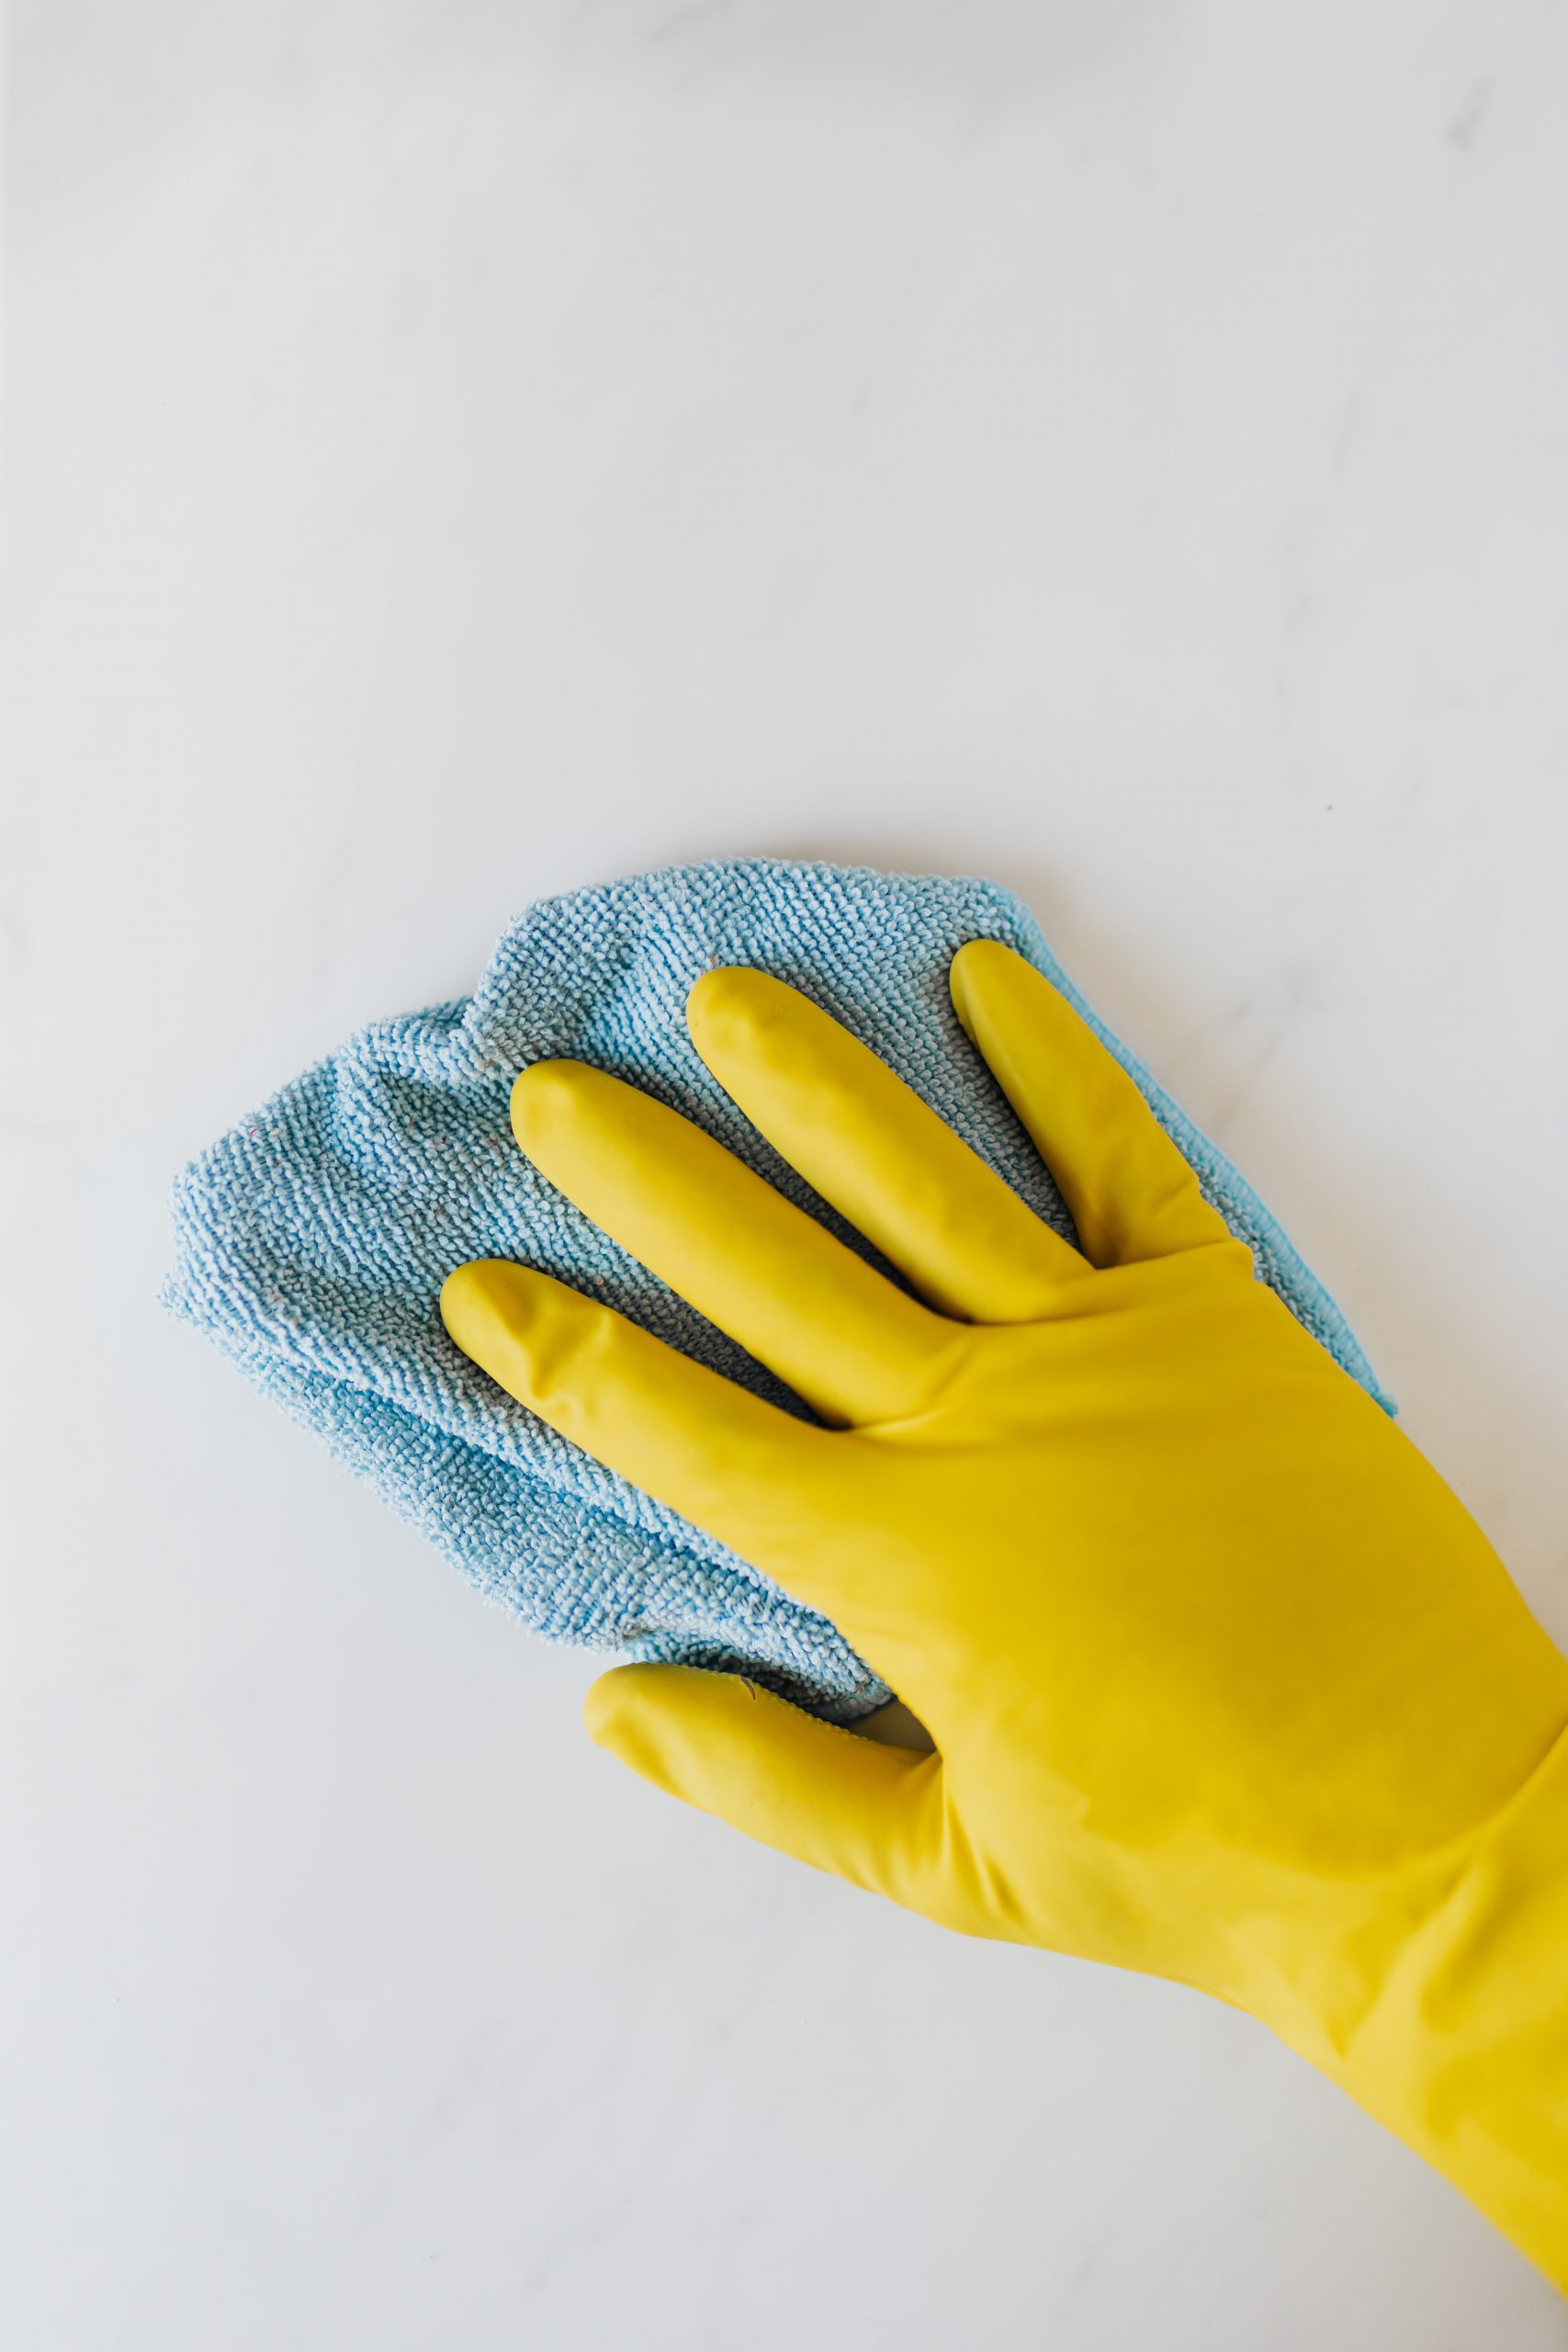 hand with cleaning glove on and a towel in the hand